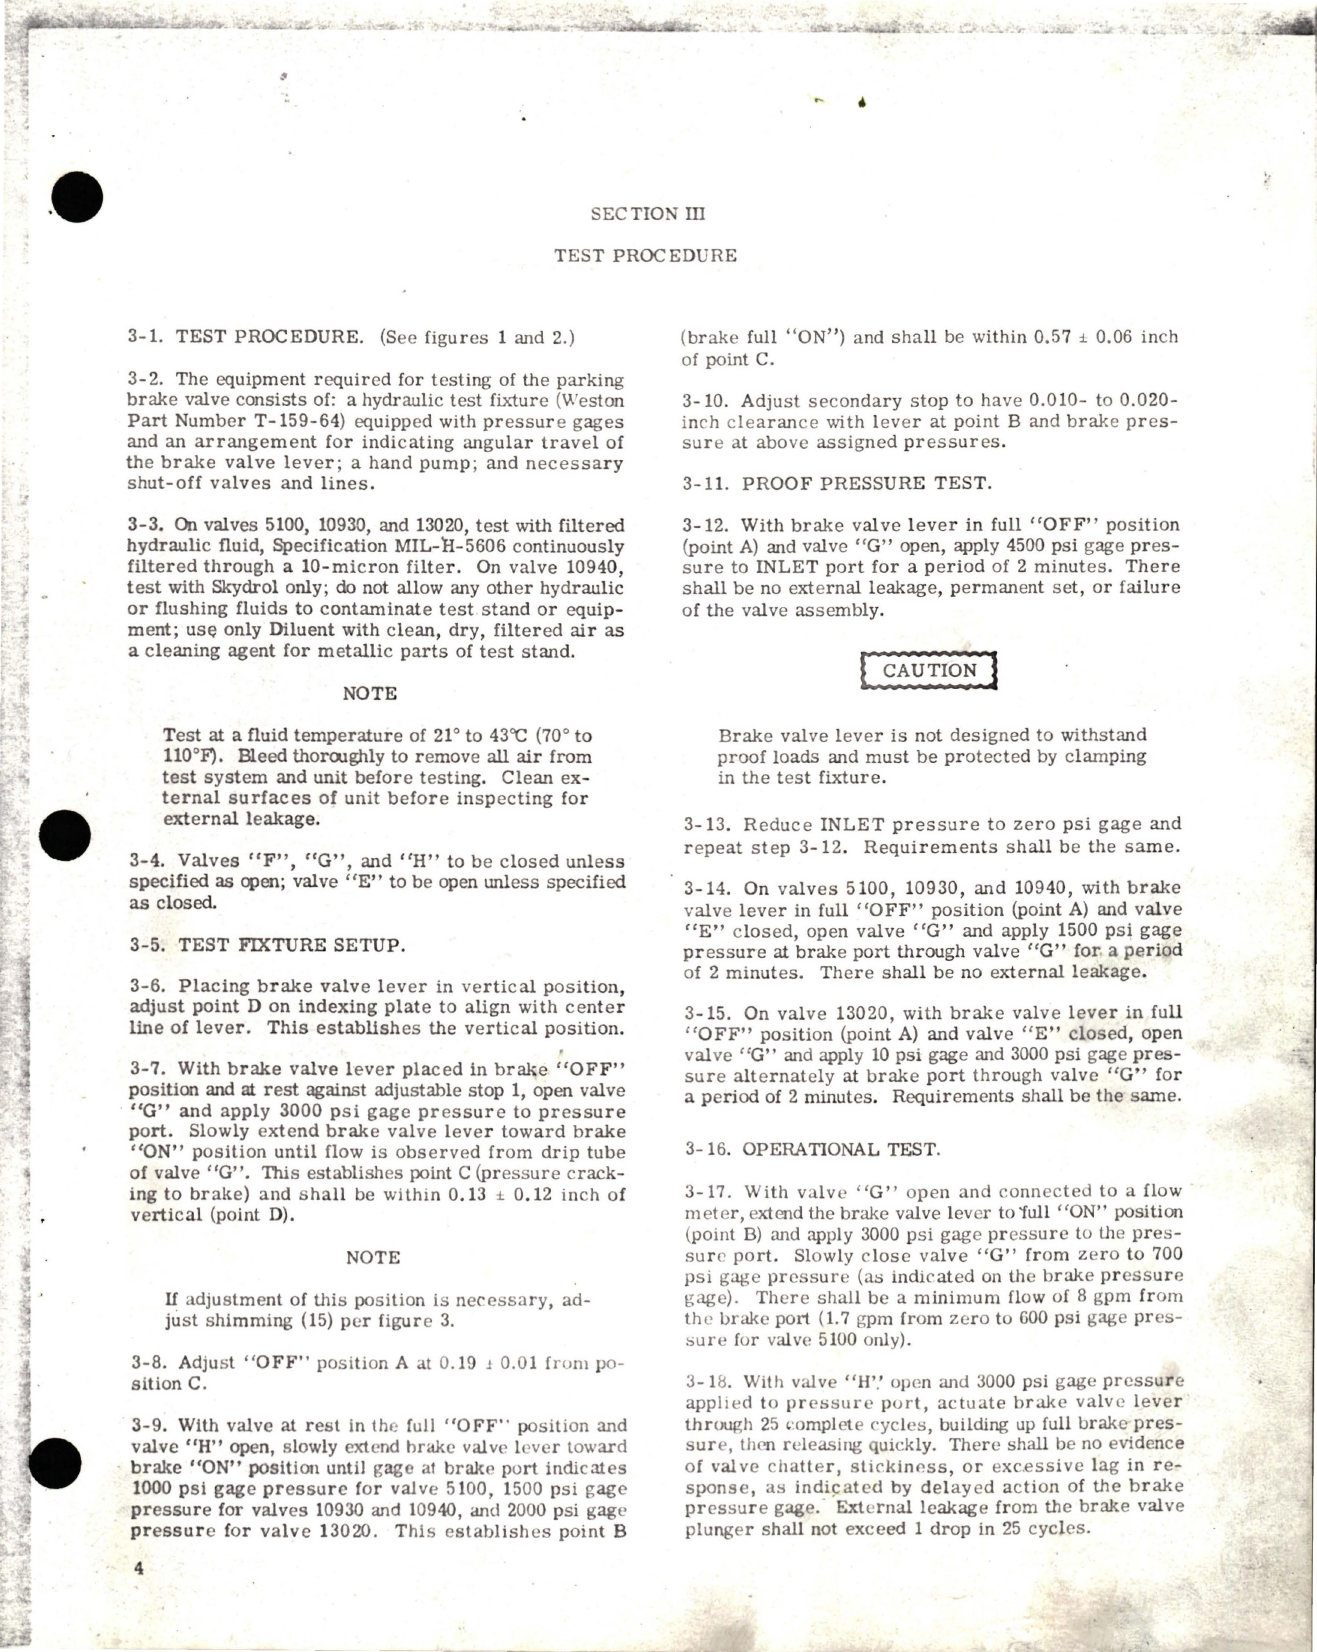 Sample page 5 from AirCorps Library document: Overhaul Instructions with Parts Catalog for Parking Brake Valves - Parts 5100, 10930, 10940, and 13020